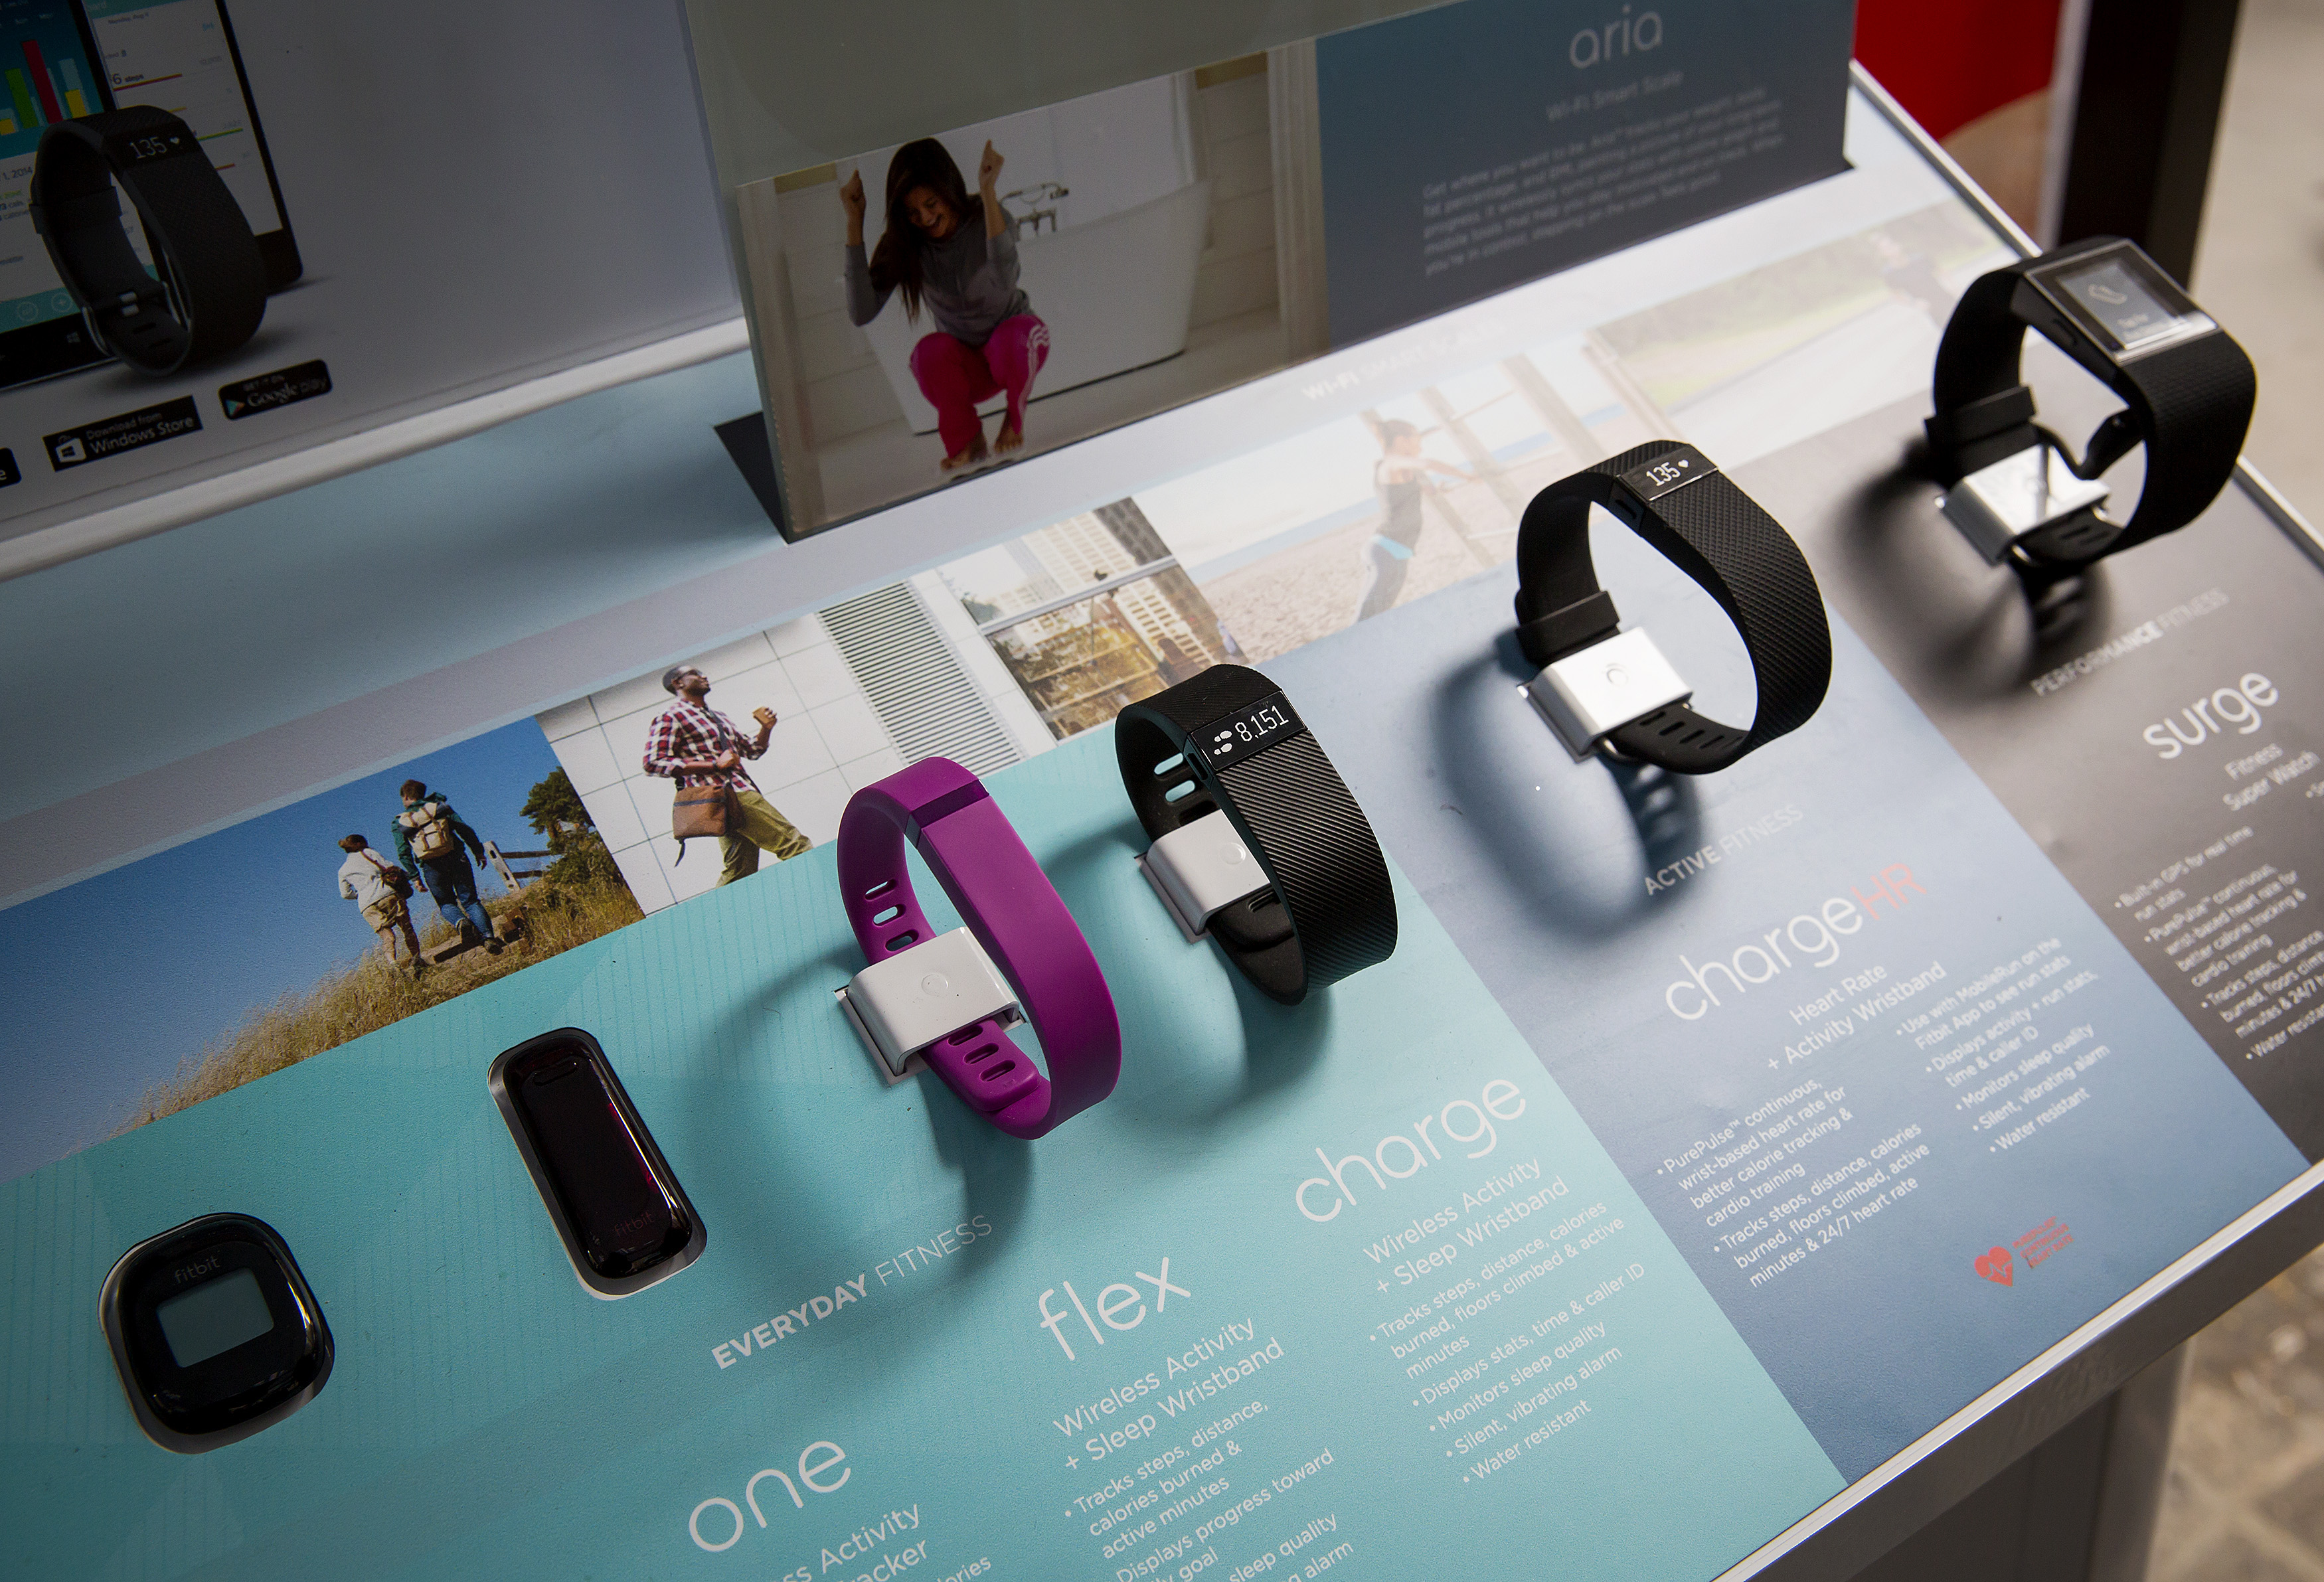 The line of Fitbit products are displayed during a lunchtime workout event outside the New York Stock Exchange during the IPO debut of the company on June 18, 2015 in New York City. (Eric Thayer&mdash;Getty Images)